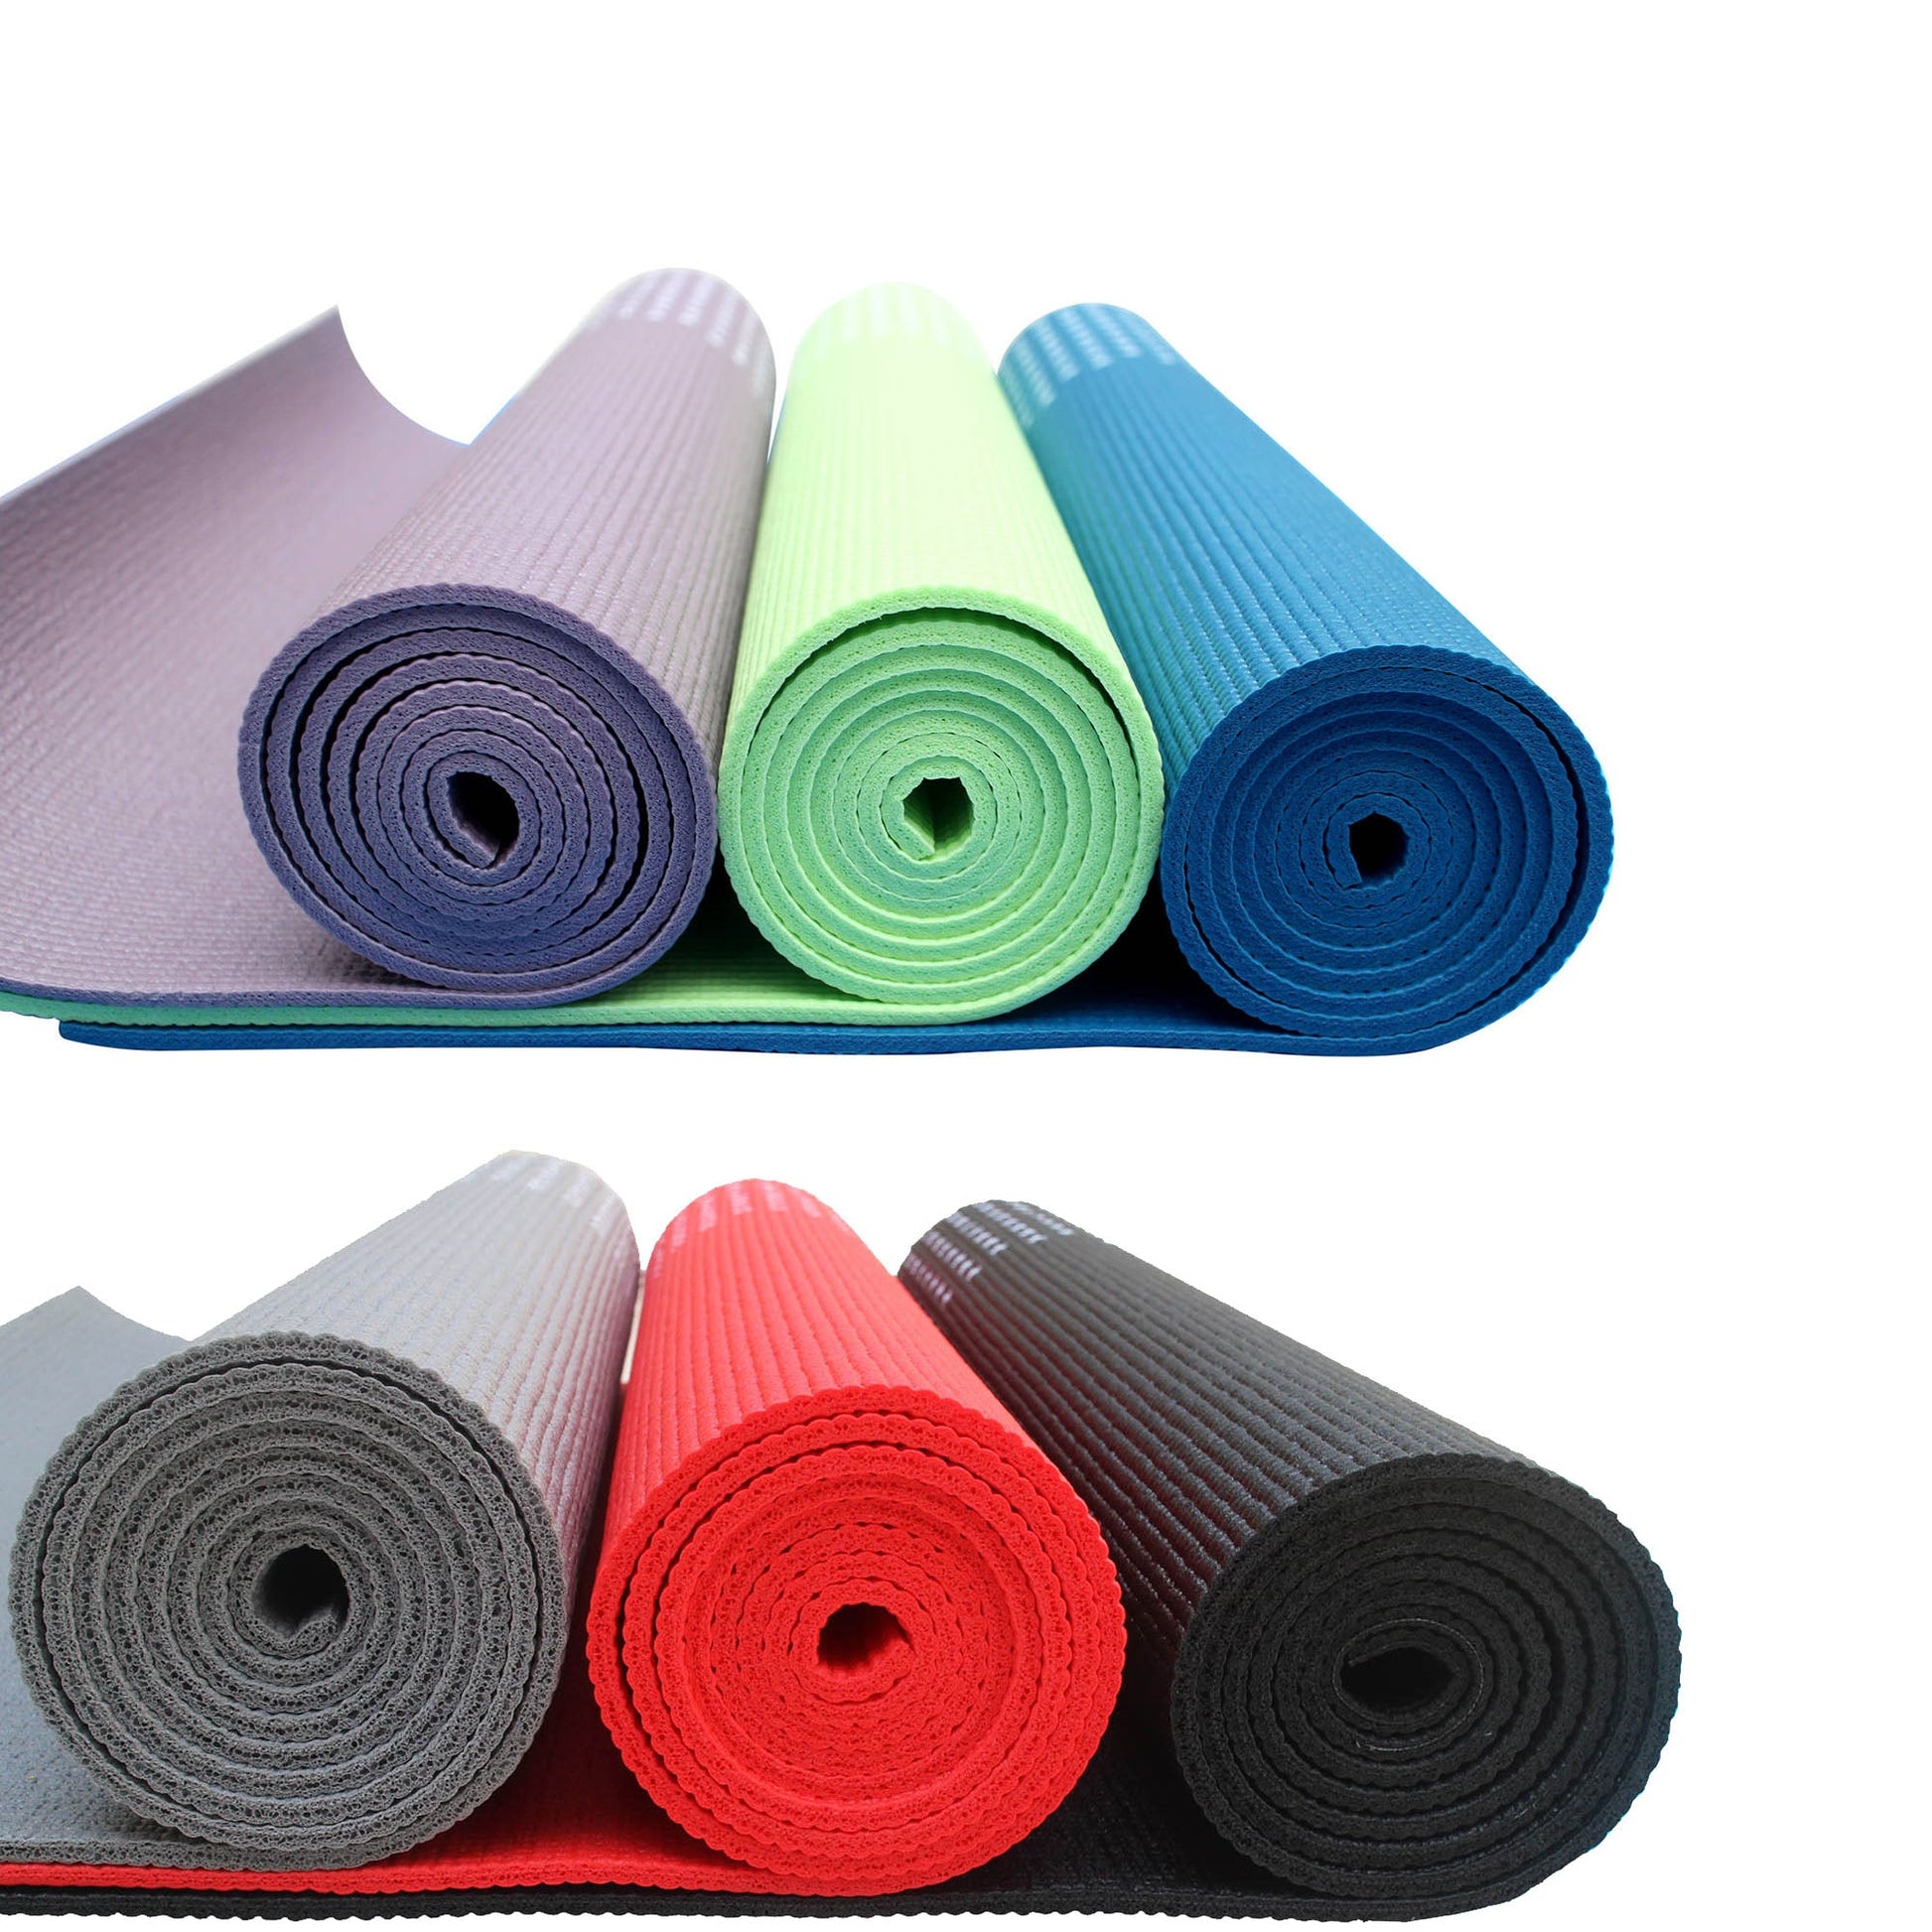 |Viavito 6mm Yoga Mat with Carry Strap - Main 2 - New|